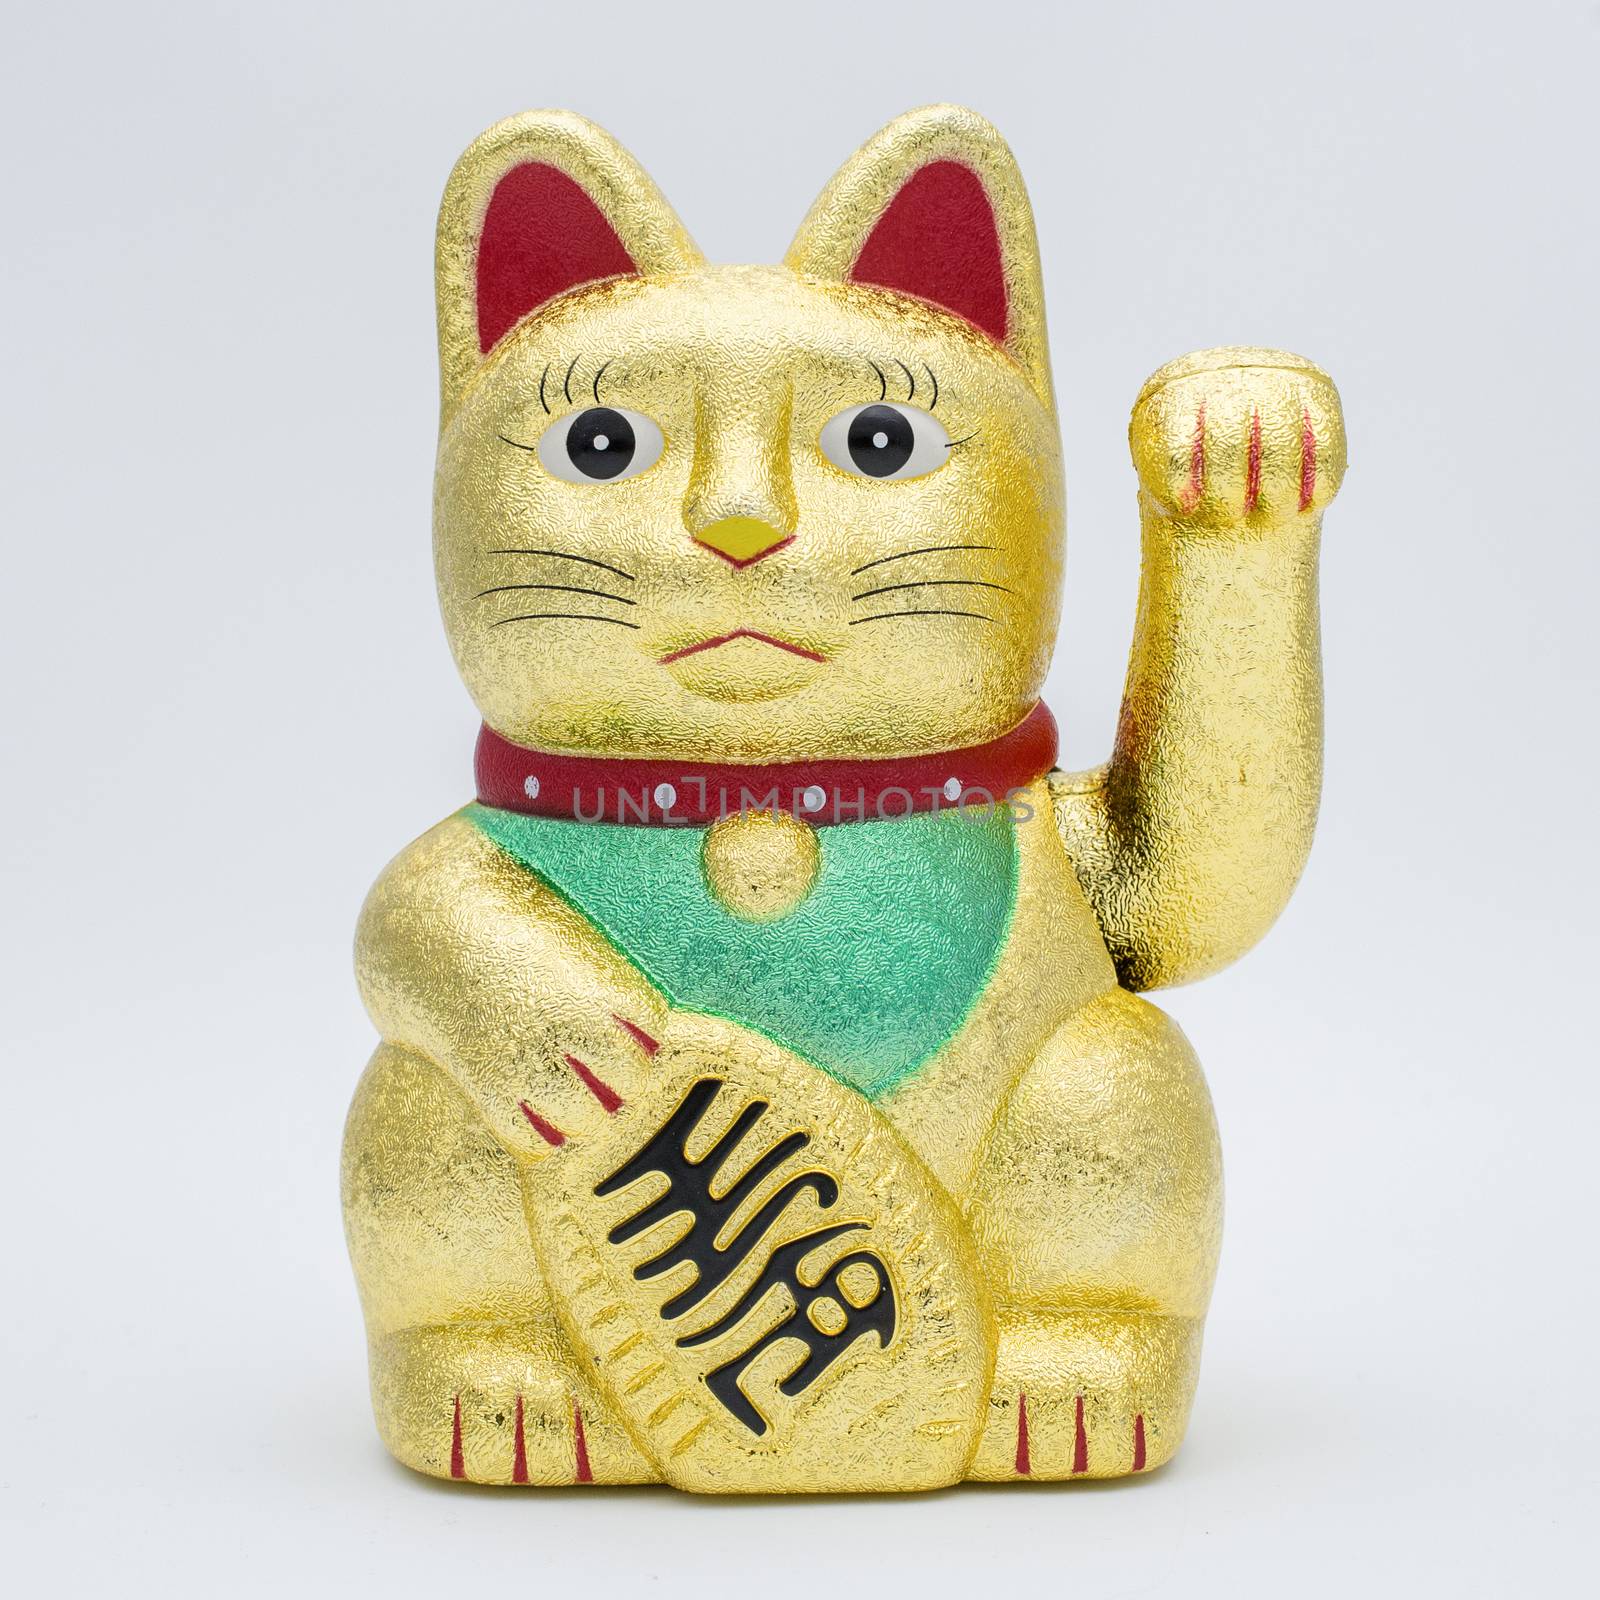 Isolated fortune or lucky cat with clipping path in jpg.